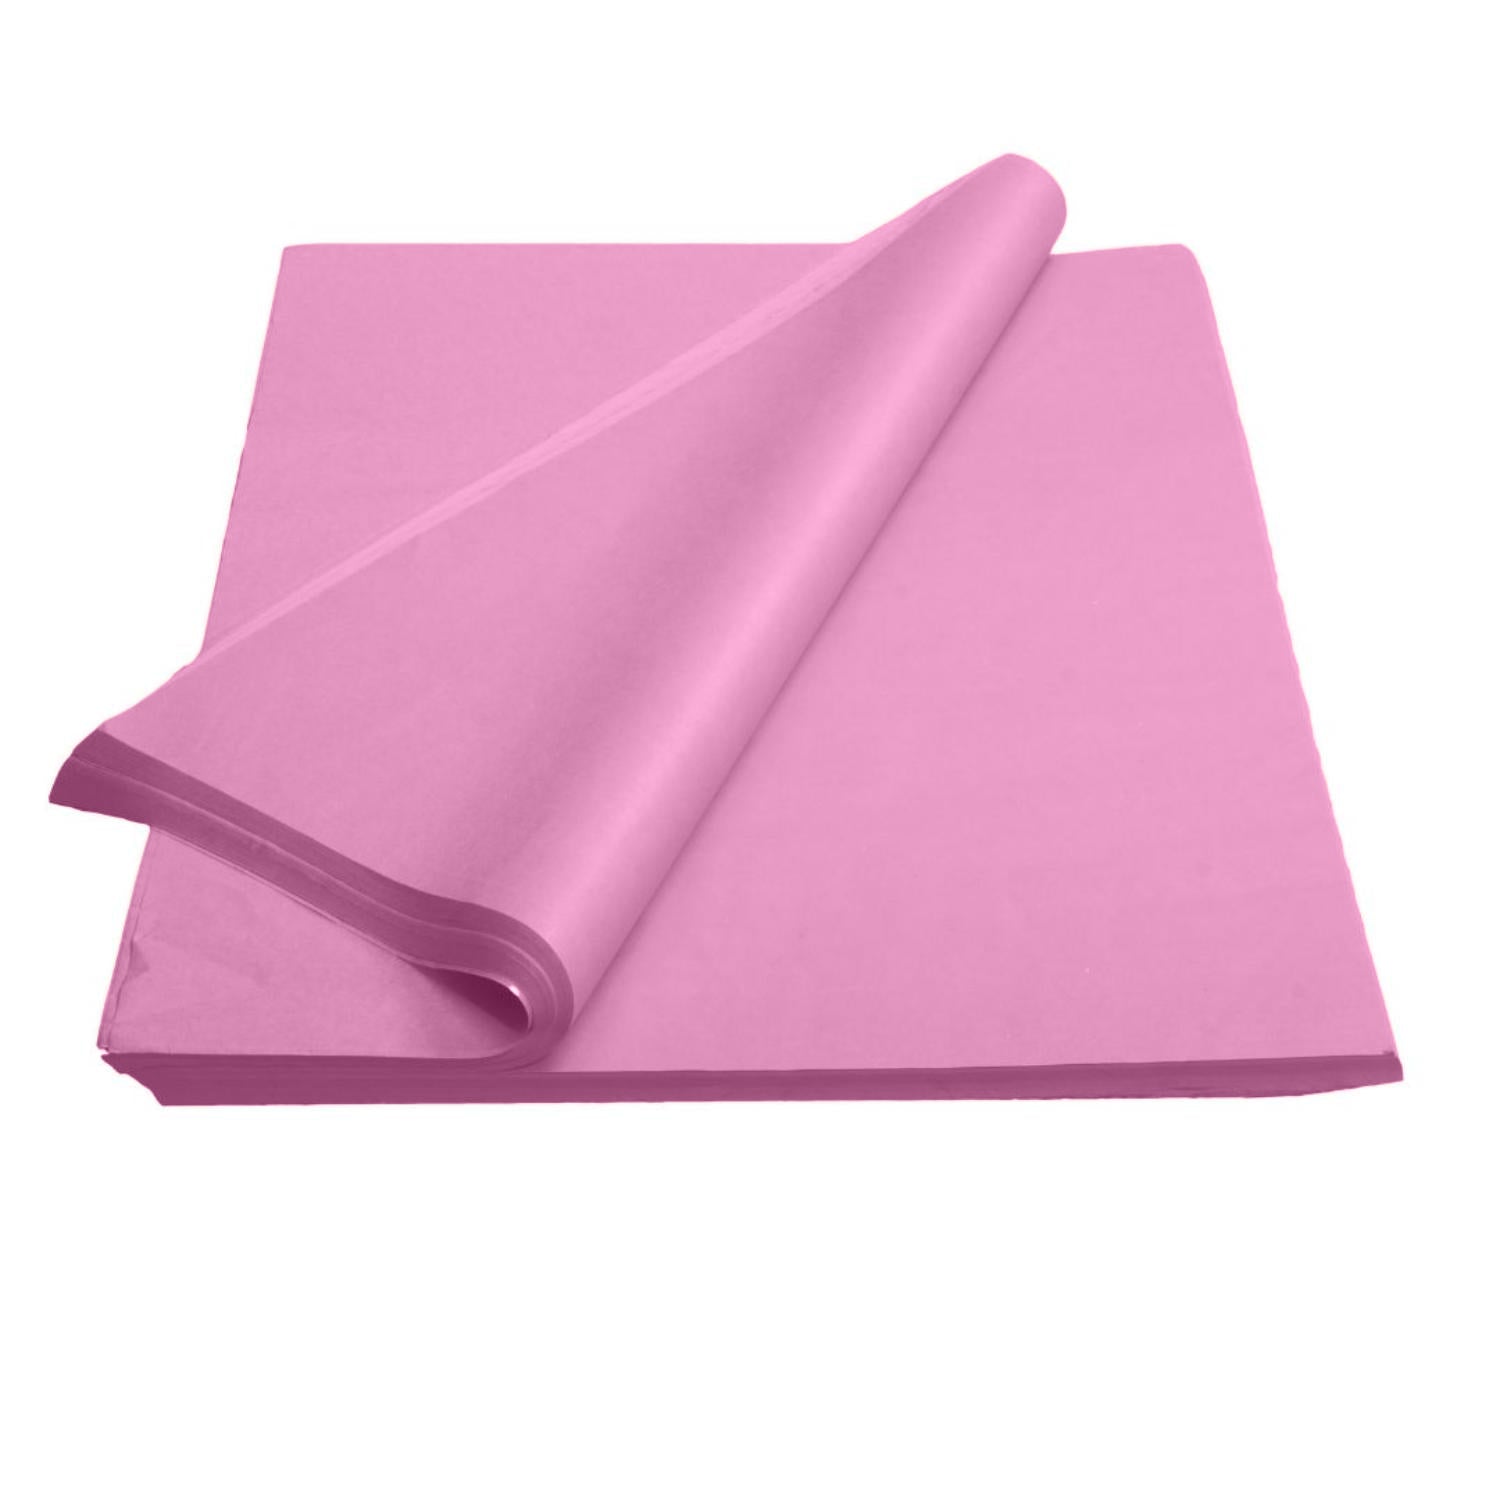 Pink and White 2-Pack Scalloped Tissue Paper, 4 sheets - Tissue